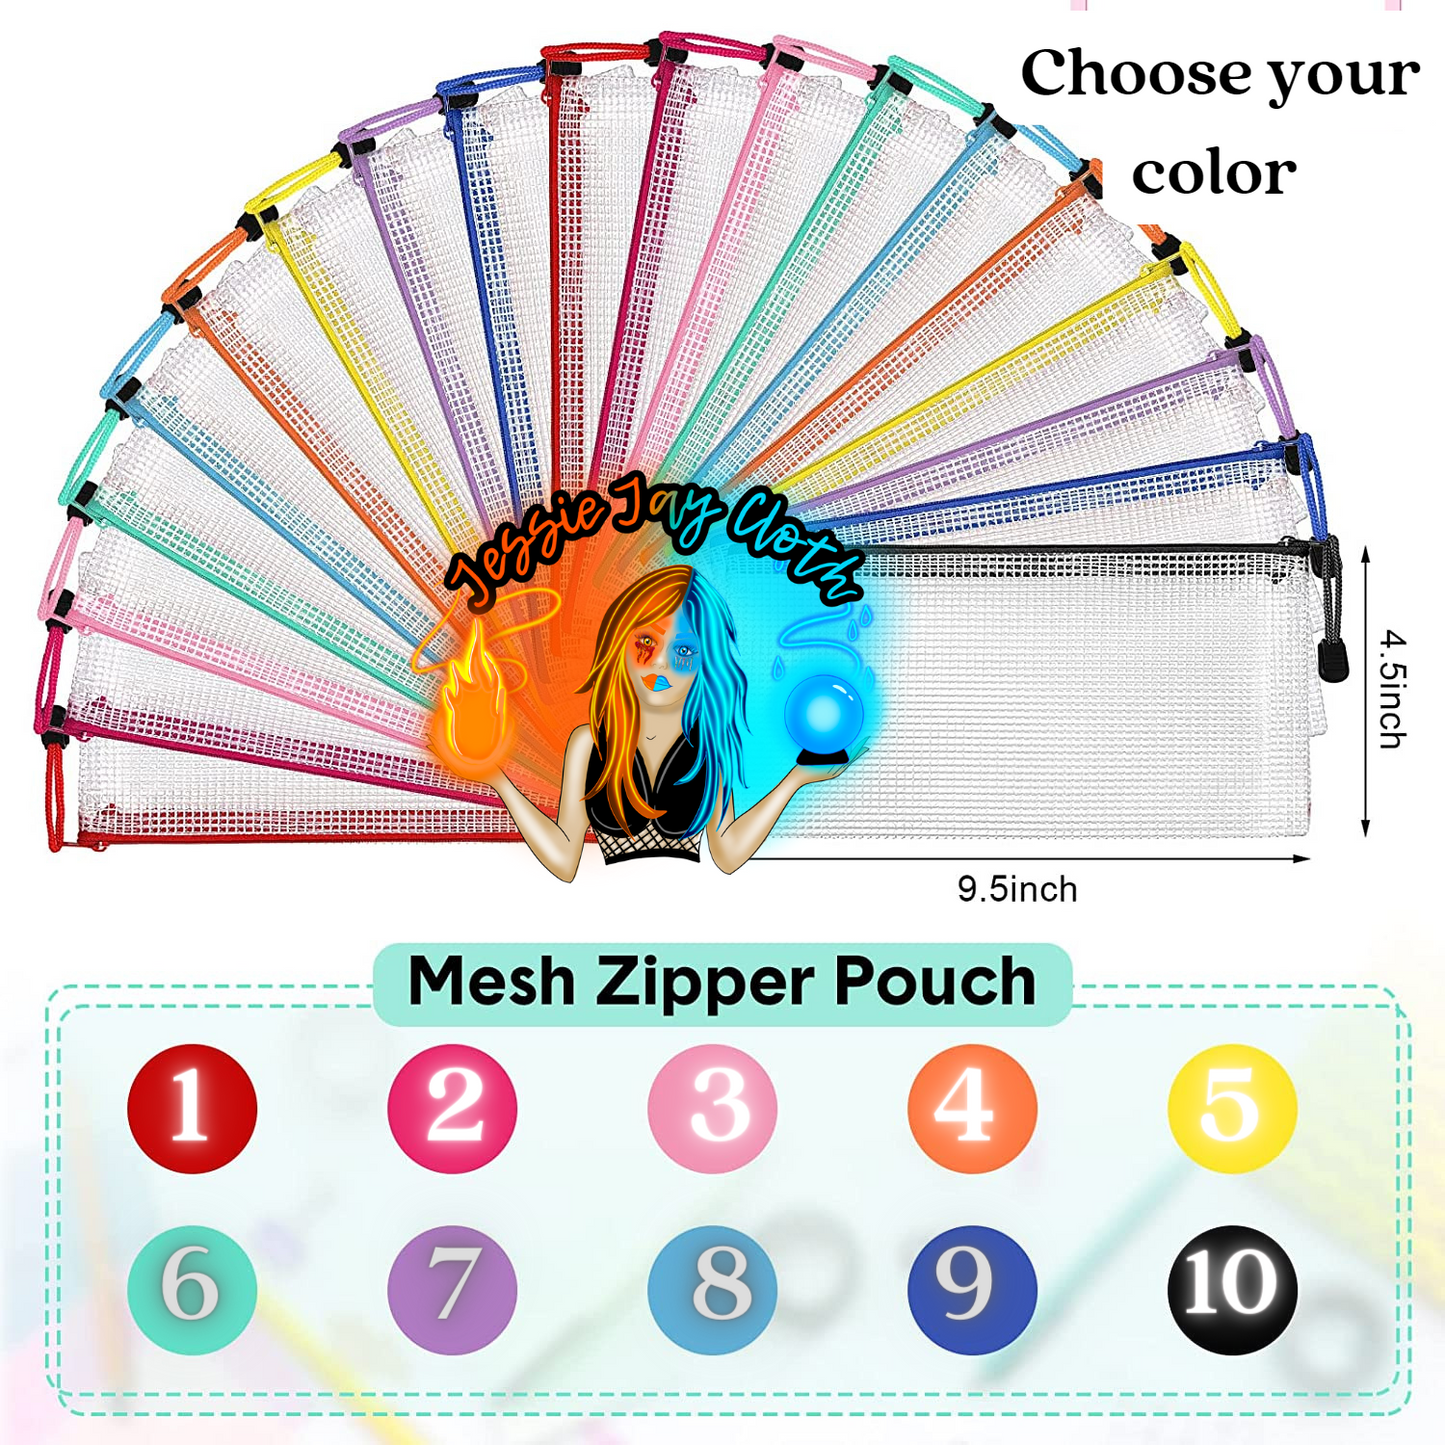 CUSTOM | Build your own 20 Piece Face Wipe Set | Storage Bag Included | 20% off Normal Pricing!